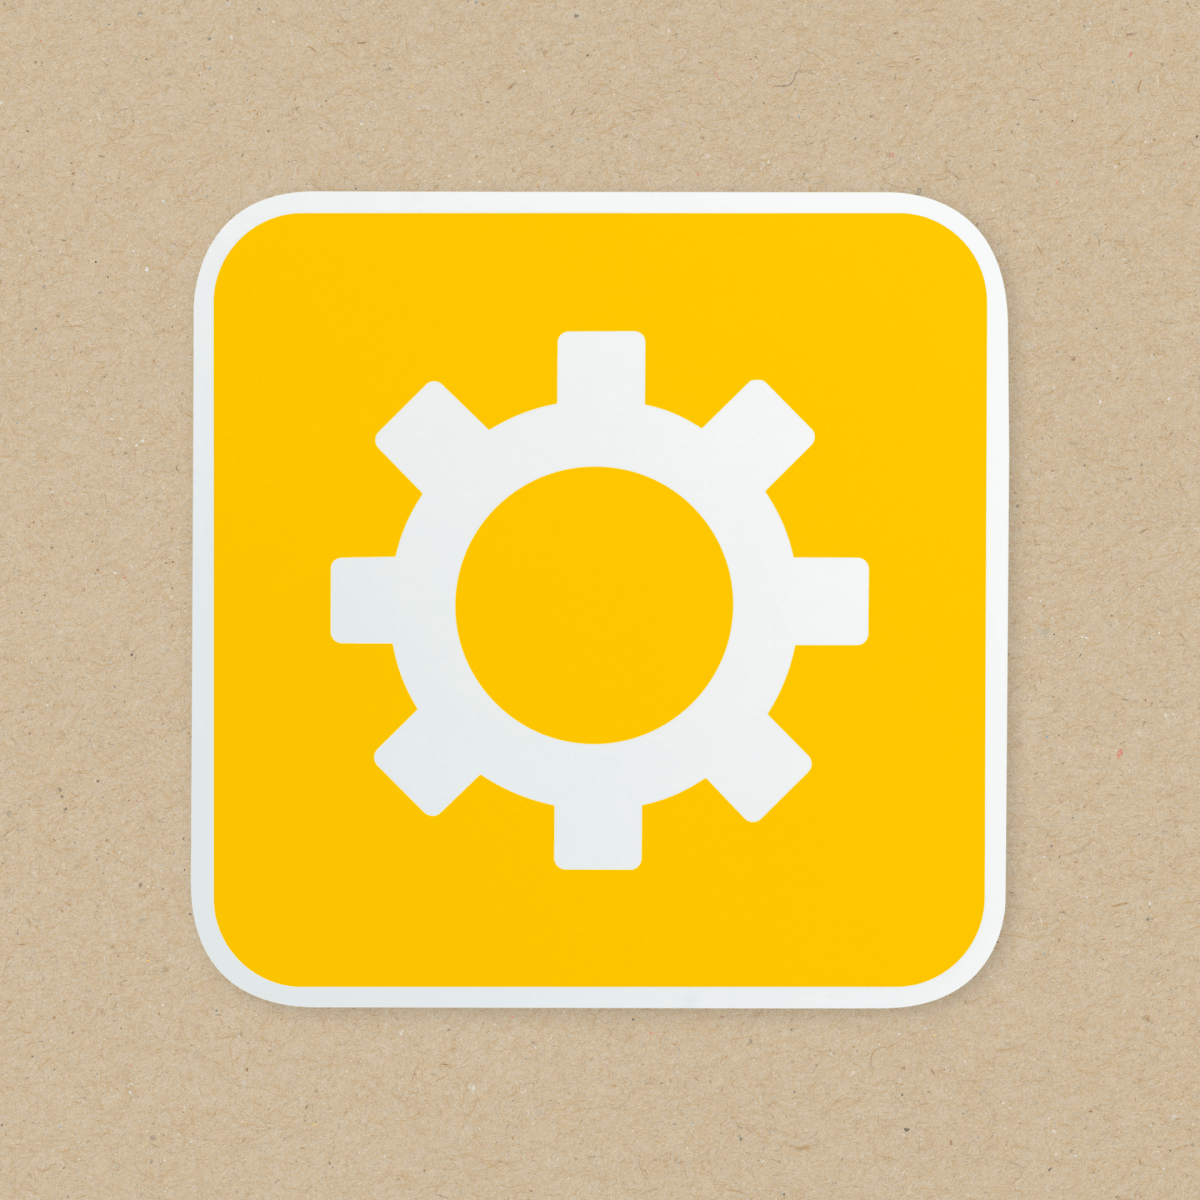 White setting logo on yellow box with brown background